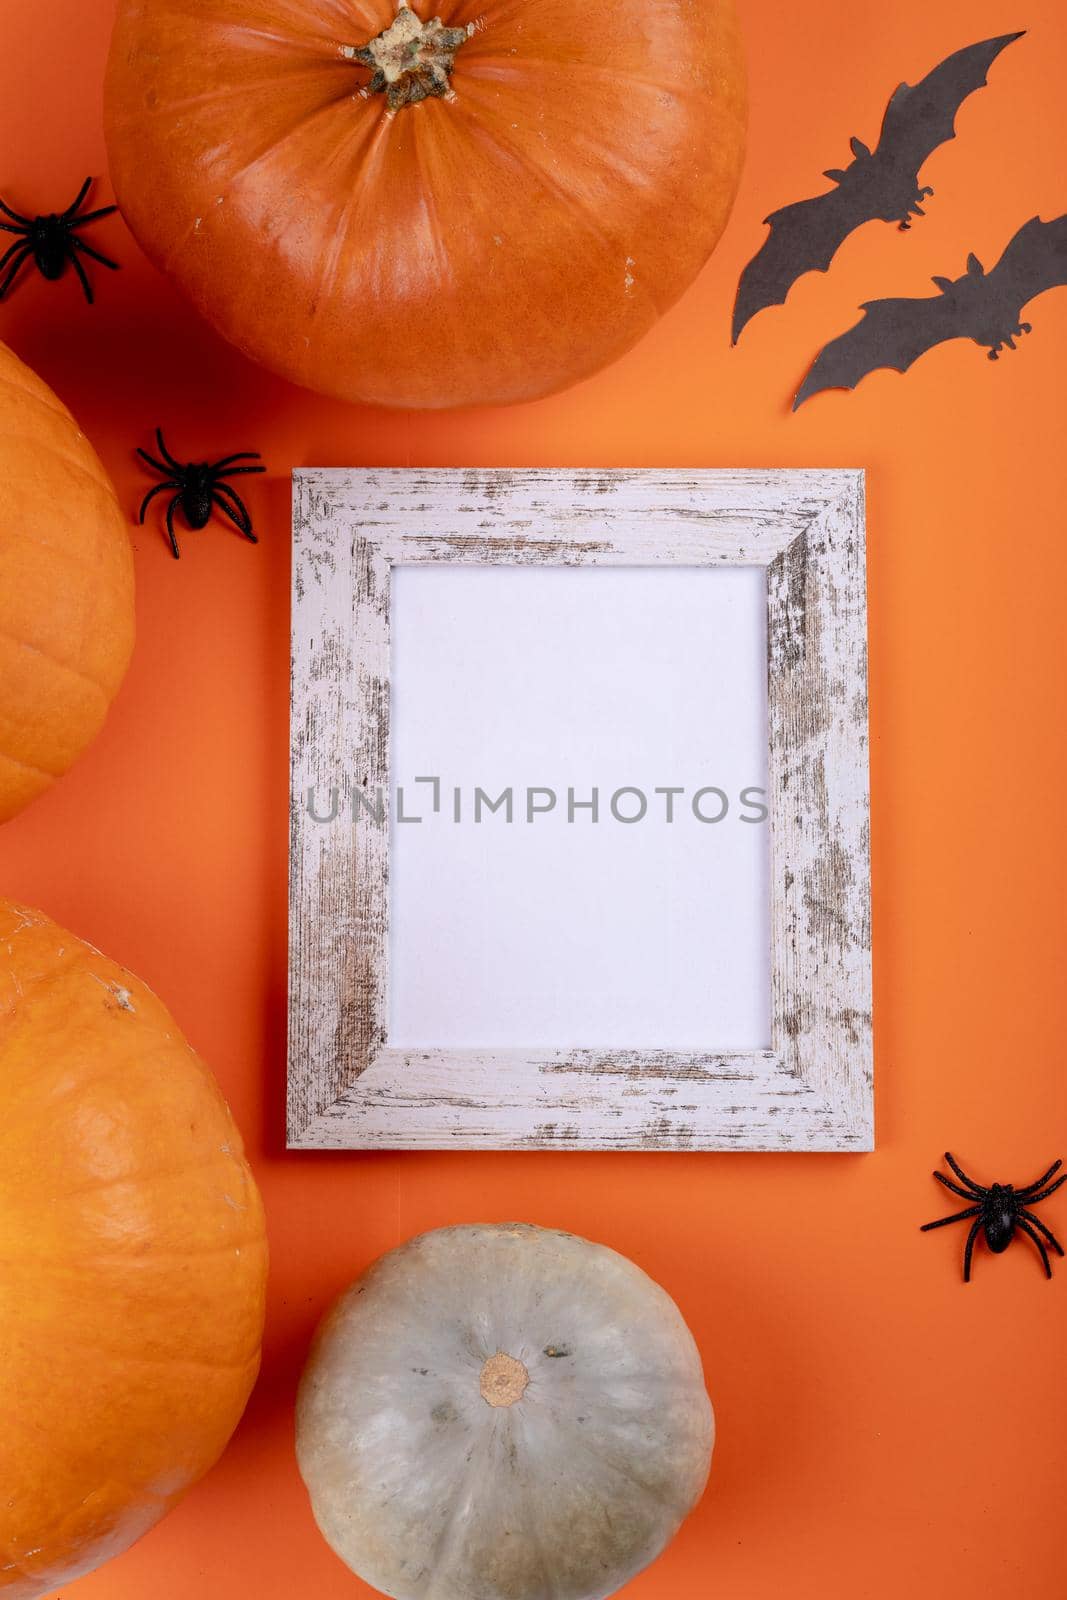 Composition of halloween decoration with pumpkins and frame with copy space on orange background. horror, fright, halloween tradition and celebration concept digitally generated image.